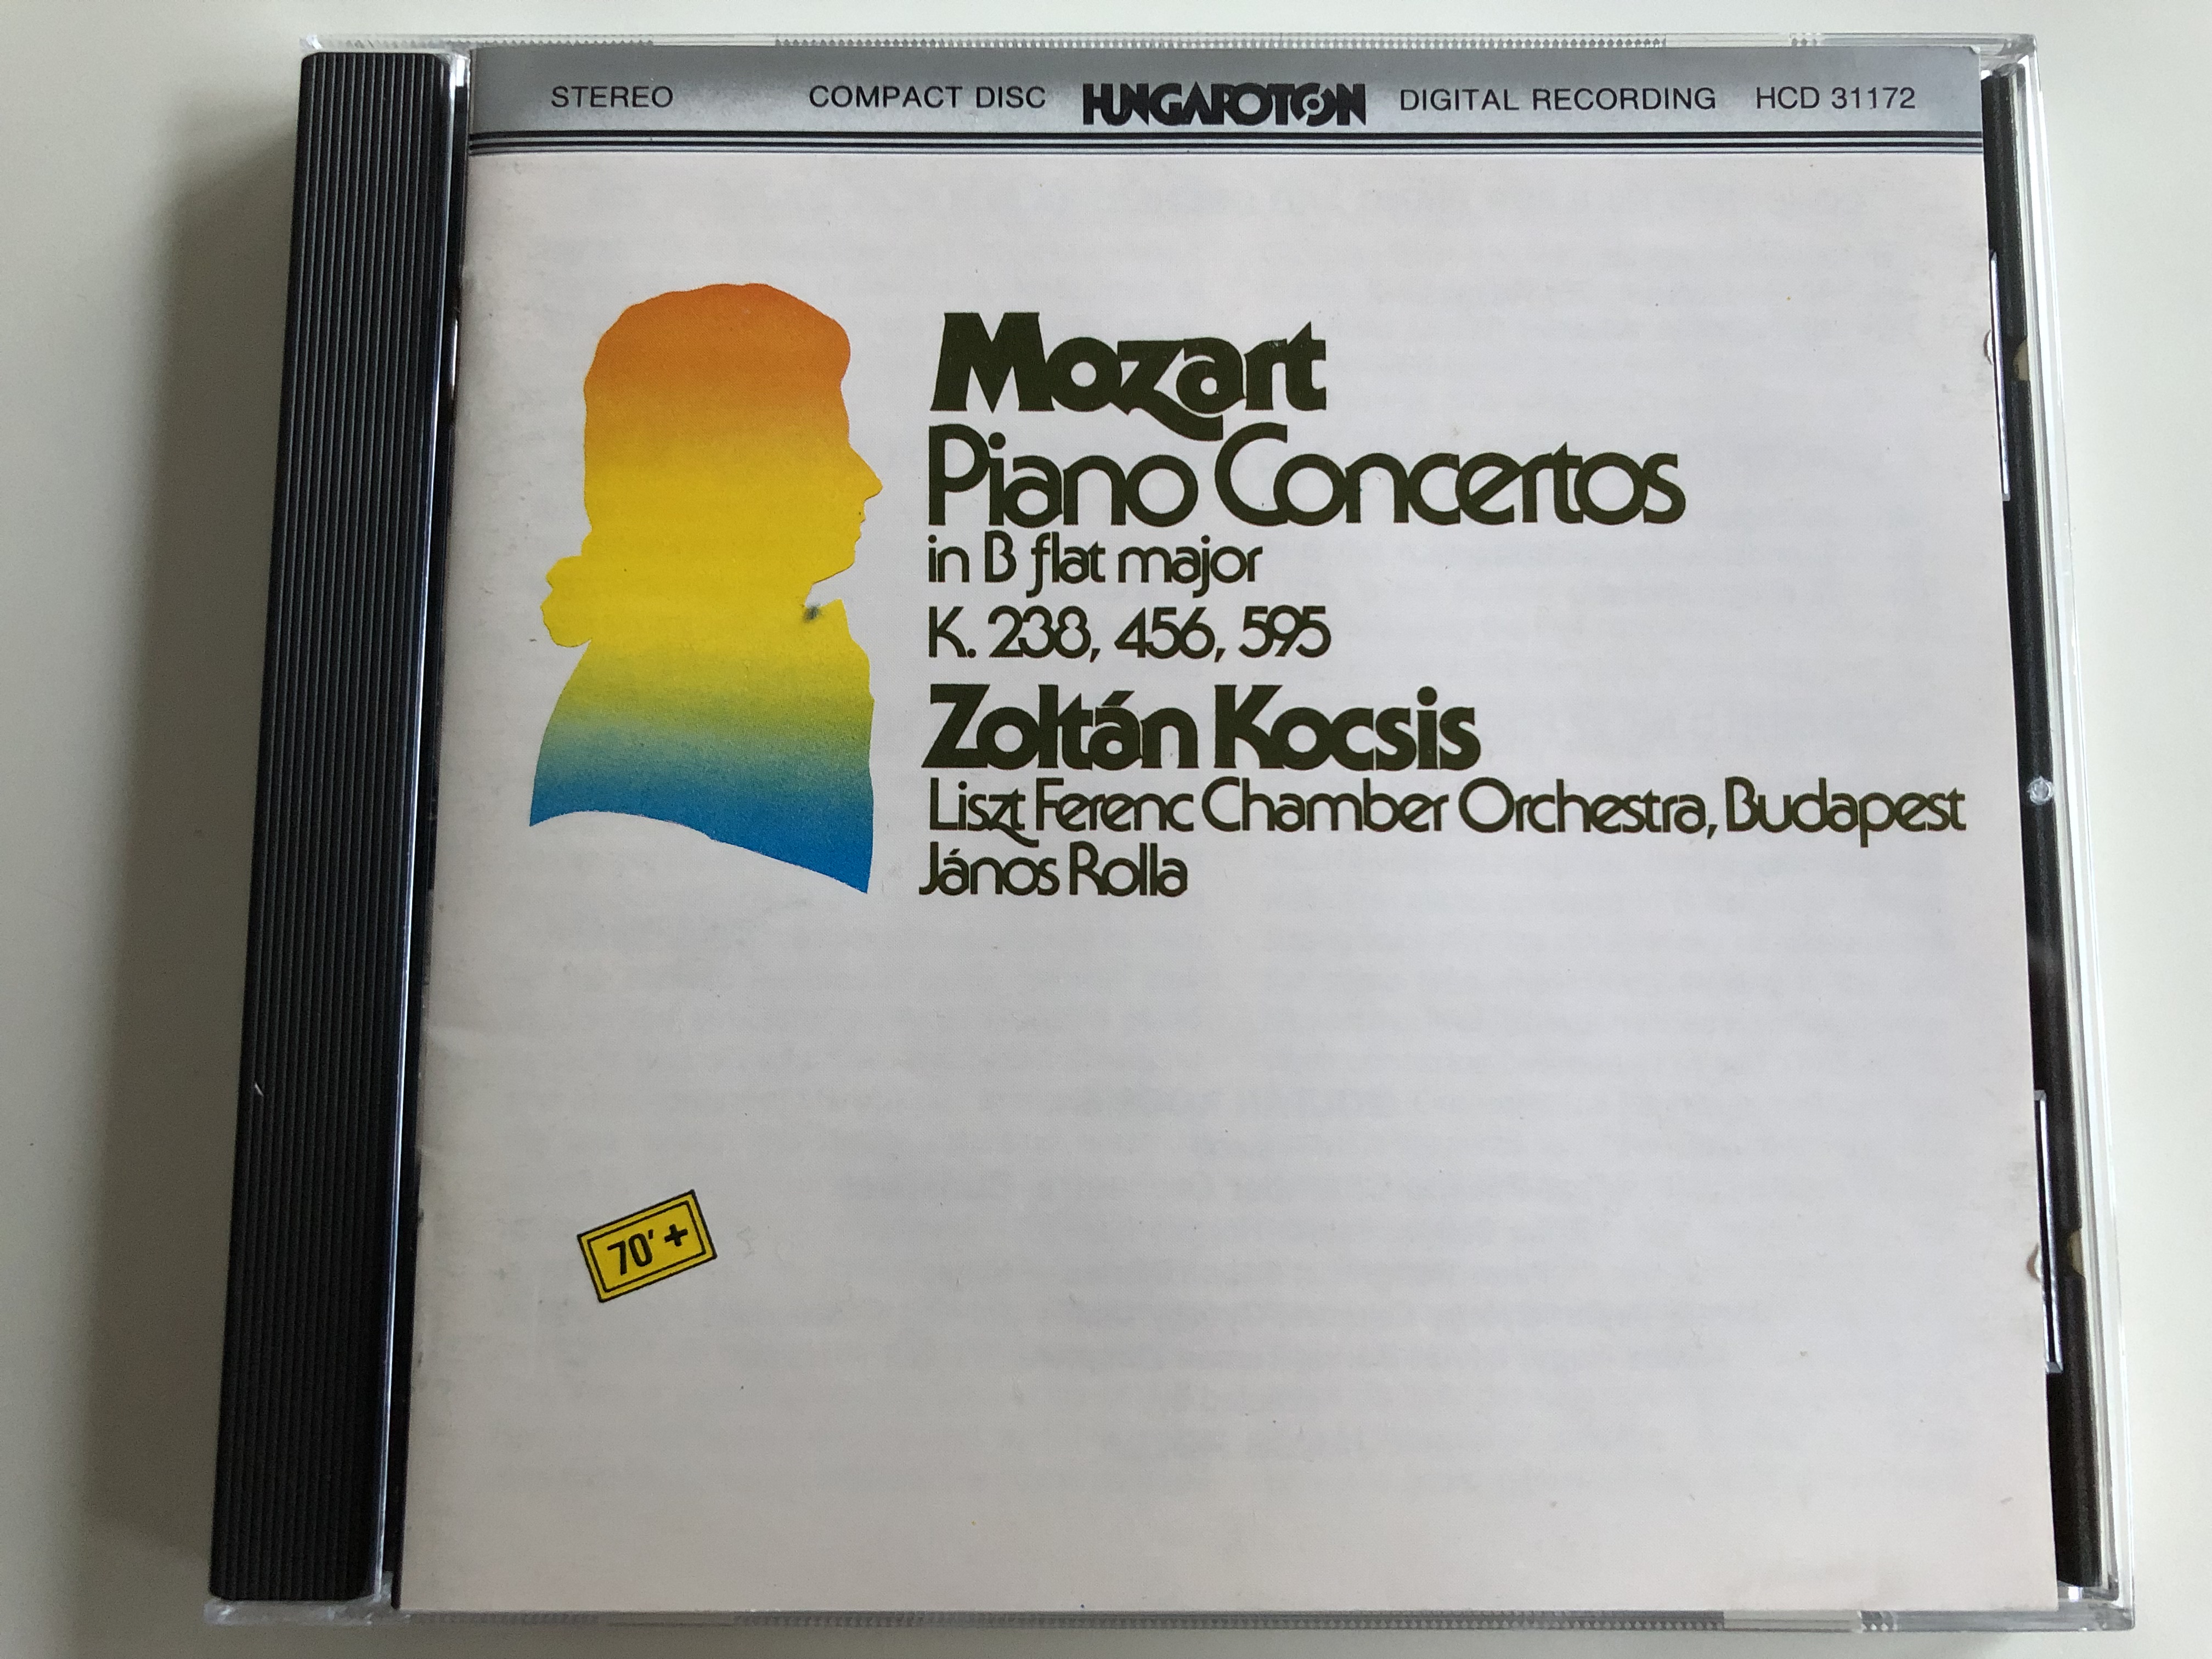 w.-a.-mozart-piano-concertos-in-b-flat-major-k.238-456-595-zolt-n-kocsis-piano-liszt-ferenc-chamber-orchestra-budapest-conducted-by-j-nos-rolla-hungaroton-classic-audio-cd-1996-hcd-31172-1-.jpg